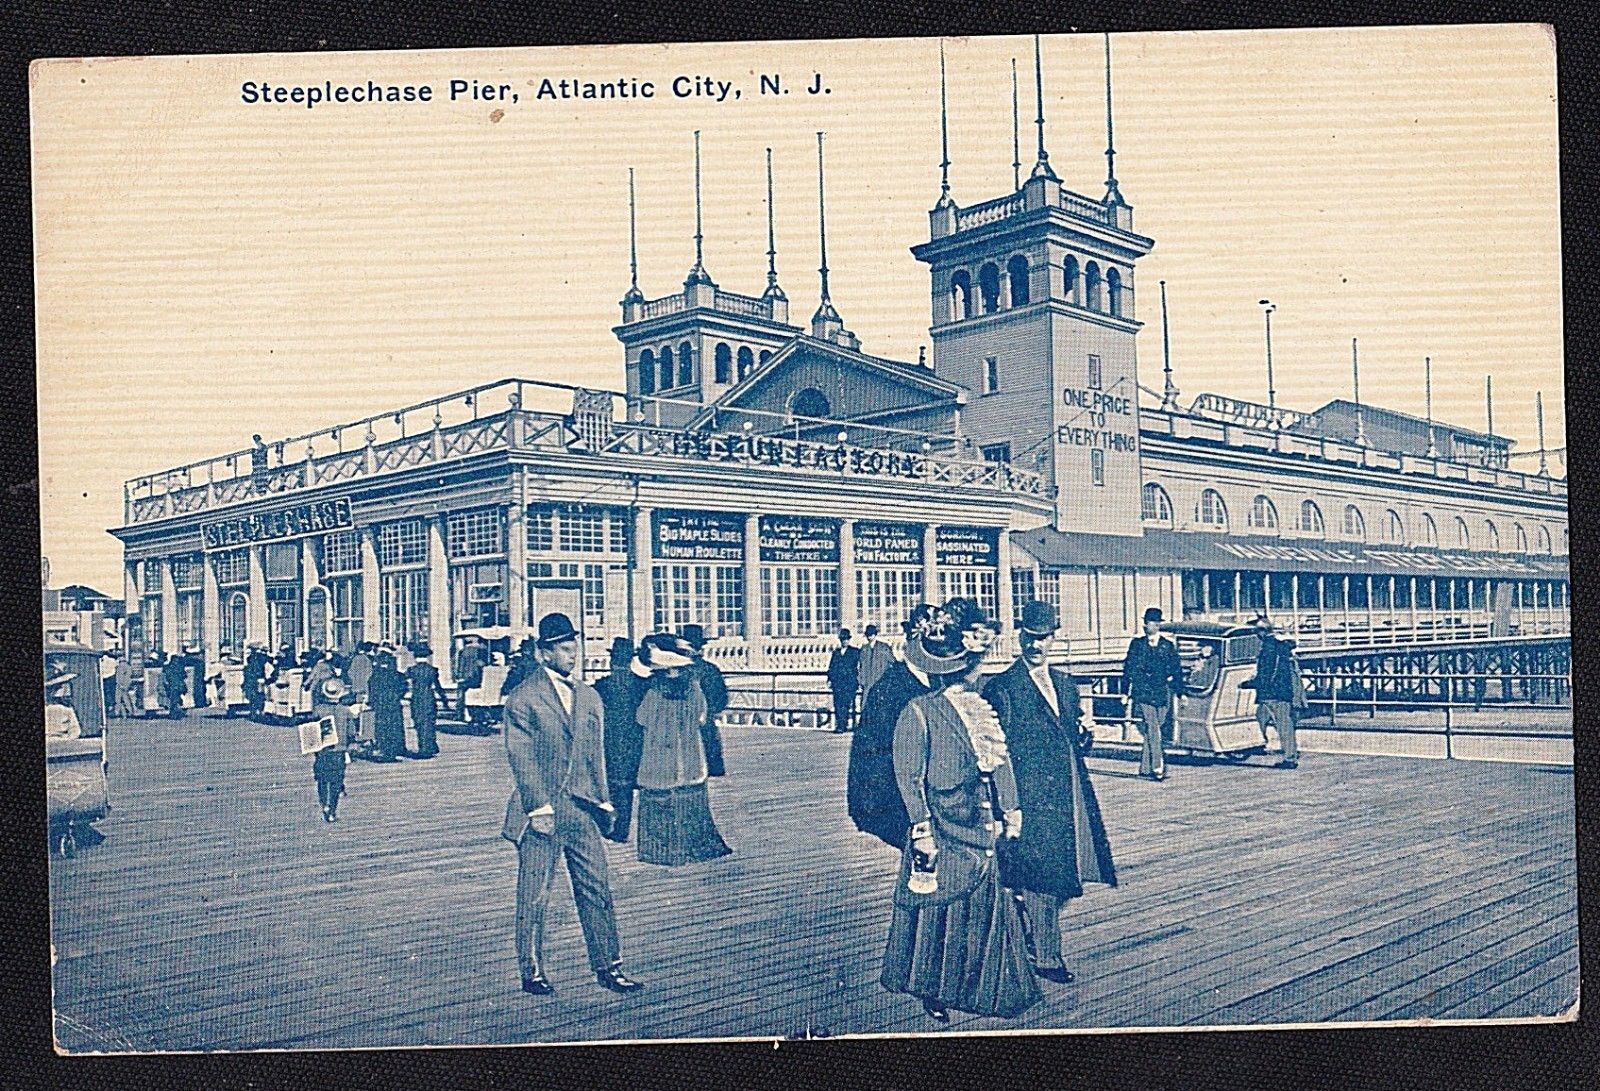 Atlantic City - Steeplechase Pier and strollers - 1911